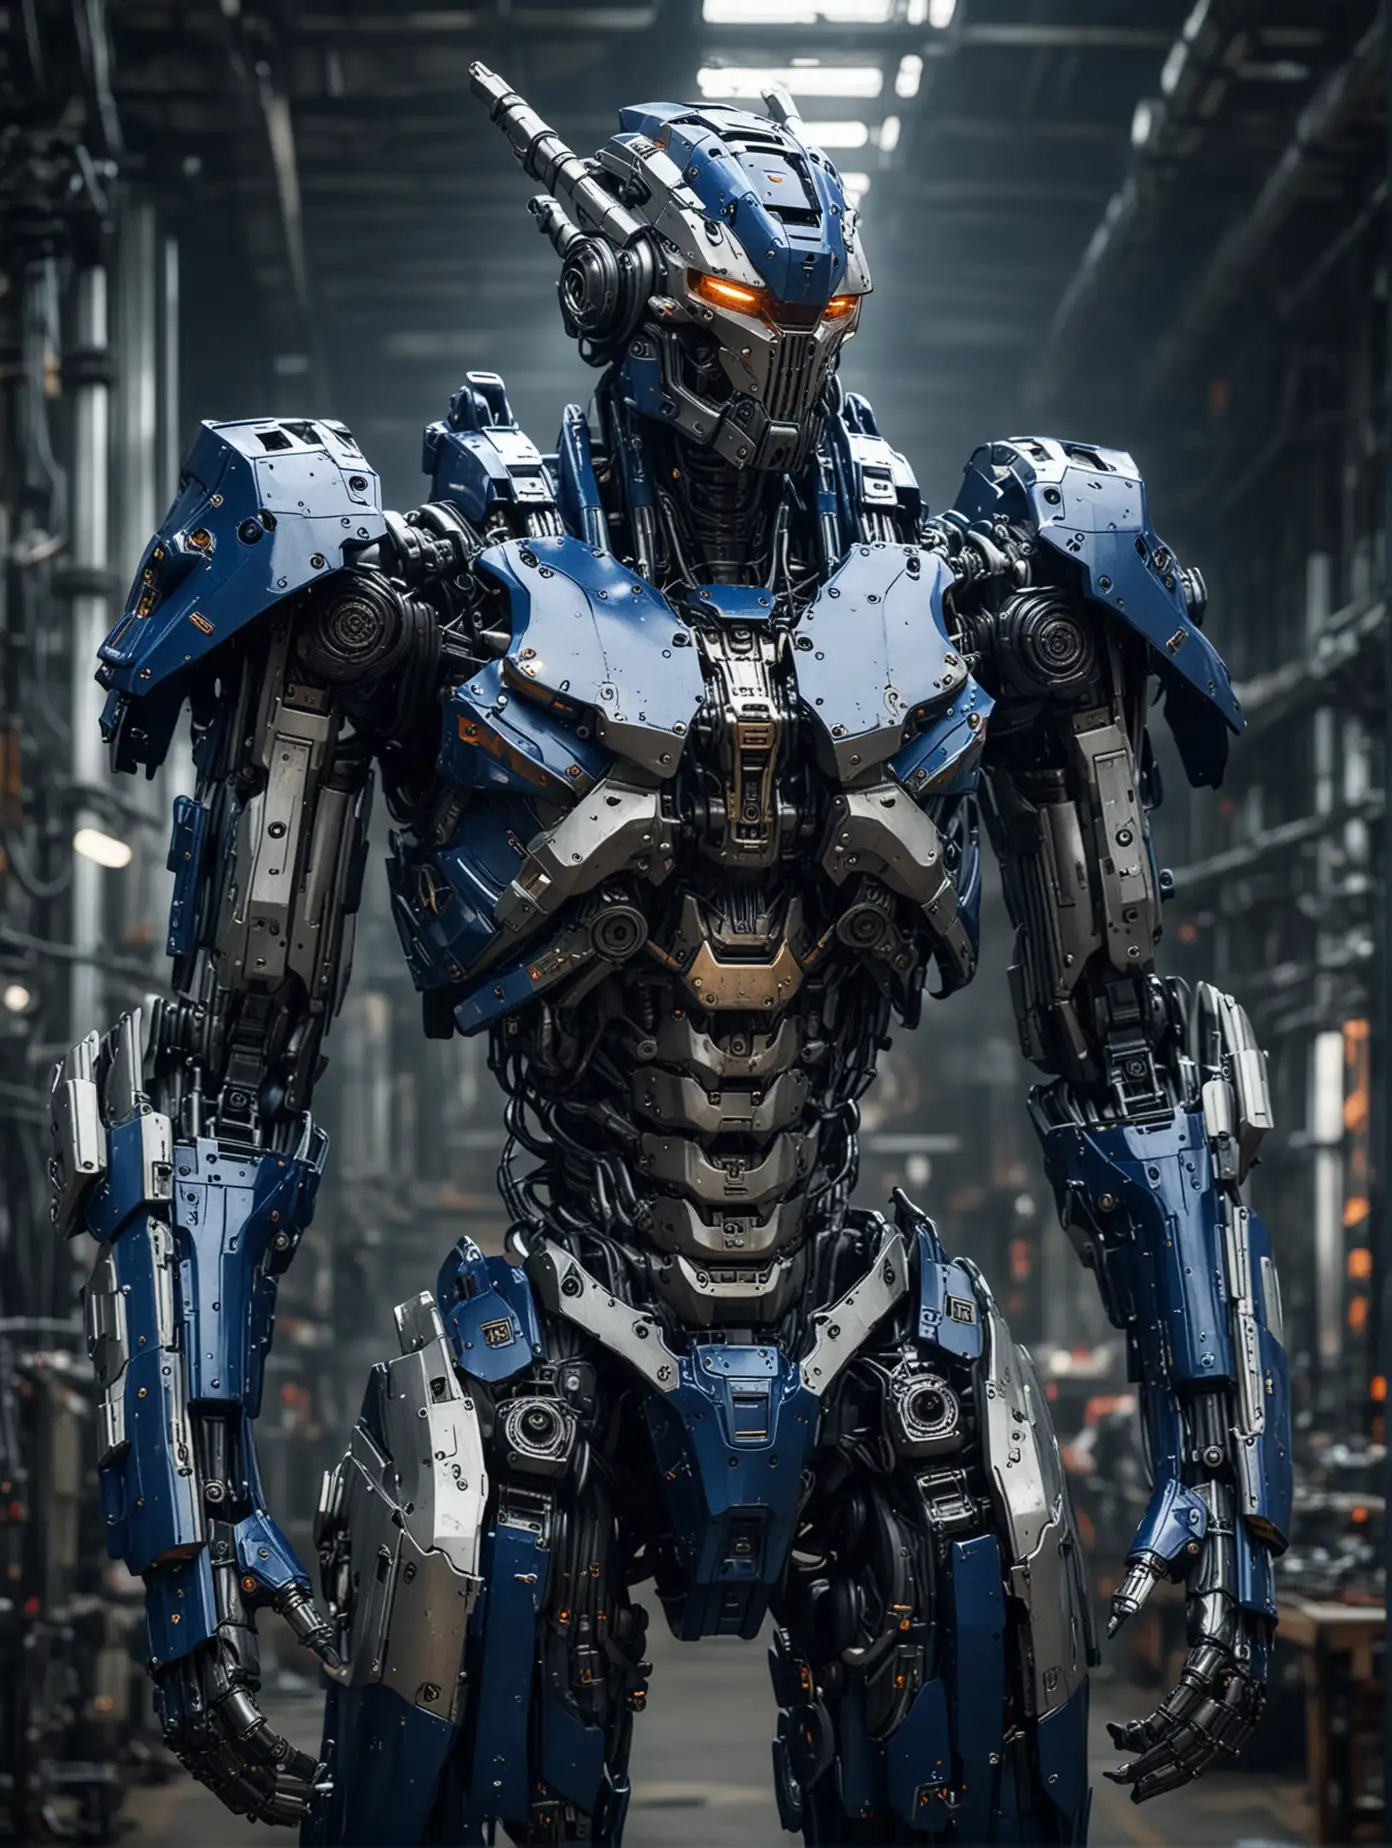 An image of a 10 feet tall mech suit, coloured in dark blue and silver, heavily armed and armoured, chest resembling a ribcage, blades, guns, and small horns, inside a factory, in a detailed cyberpunk like style